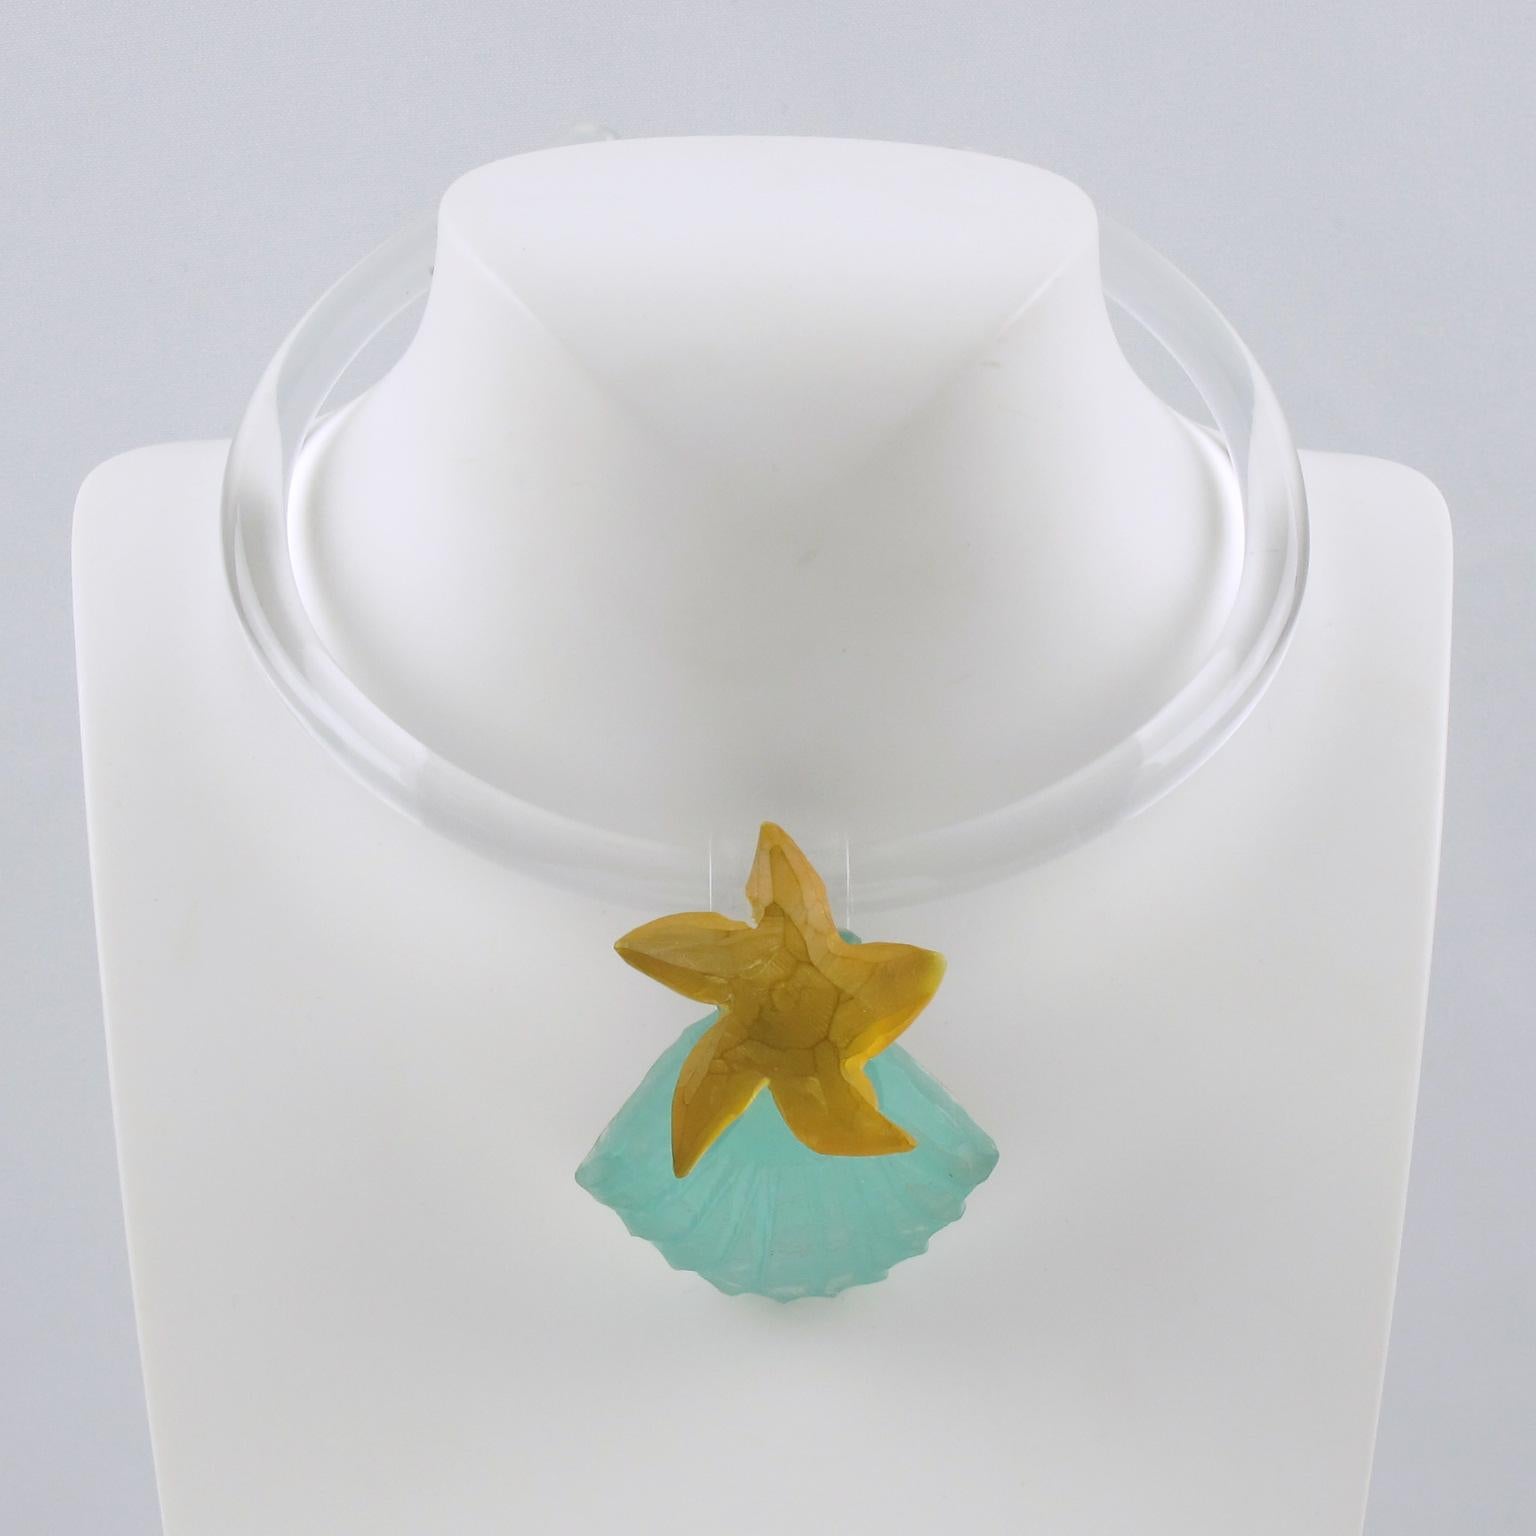 Kaso Rigid Lucite Choker Necklace Green Yellow Shell and Starfish In Excellent Condition For Sale In Atlanta, GA